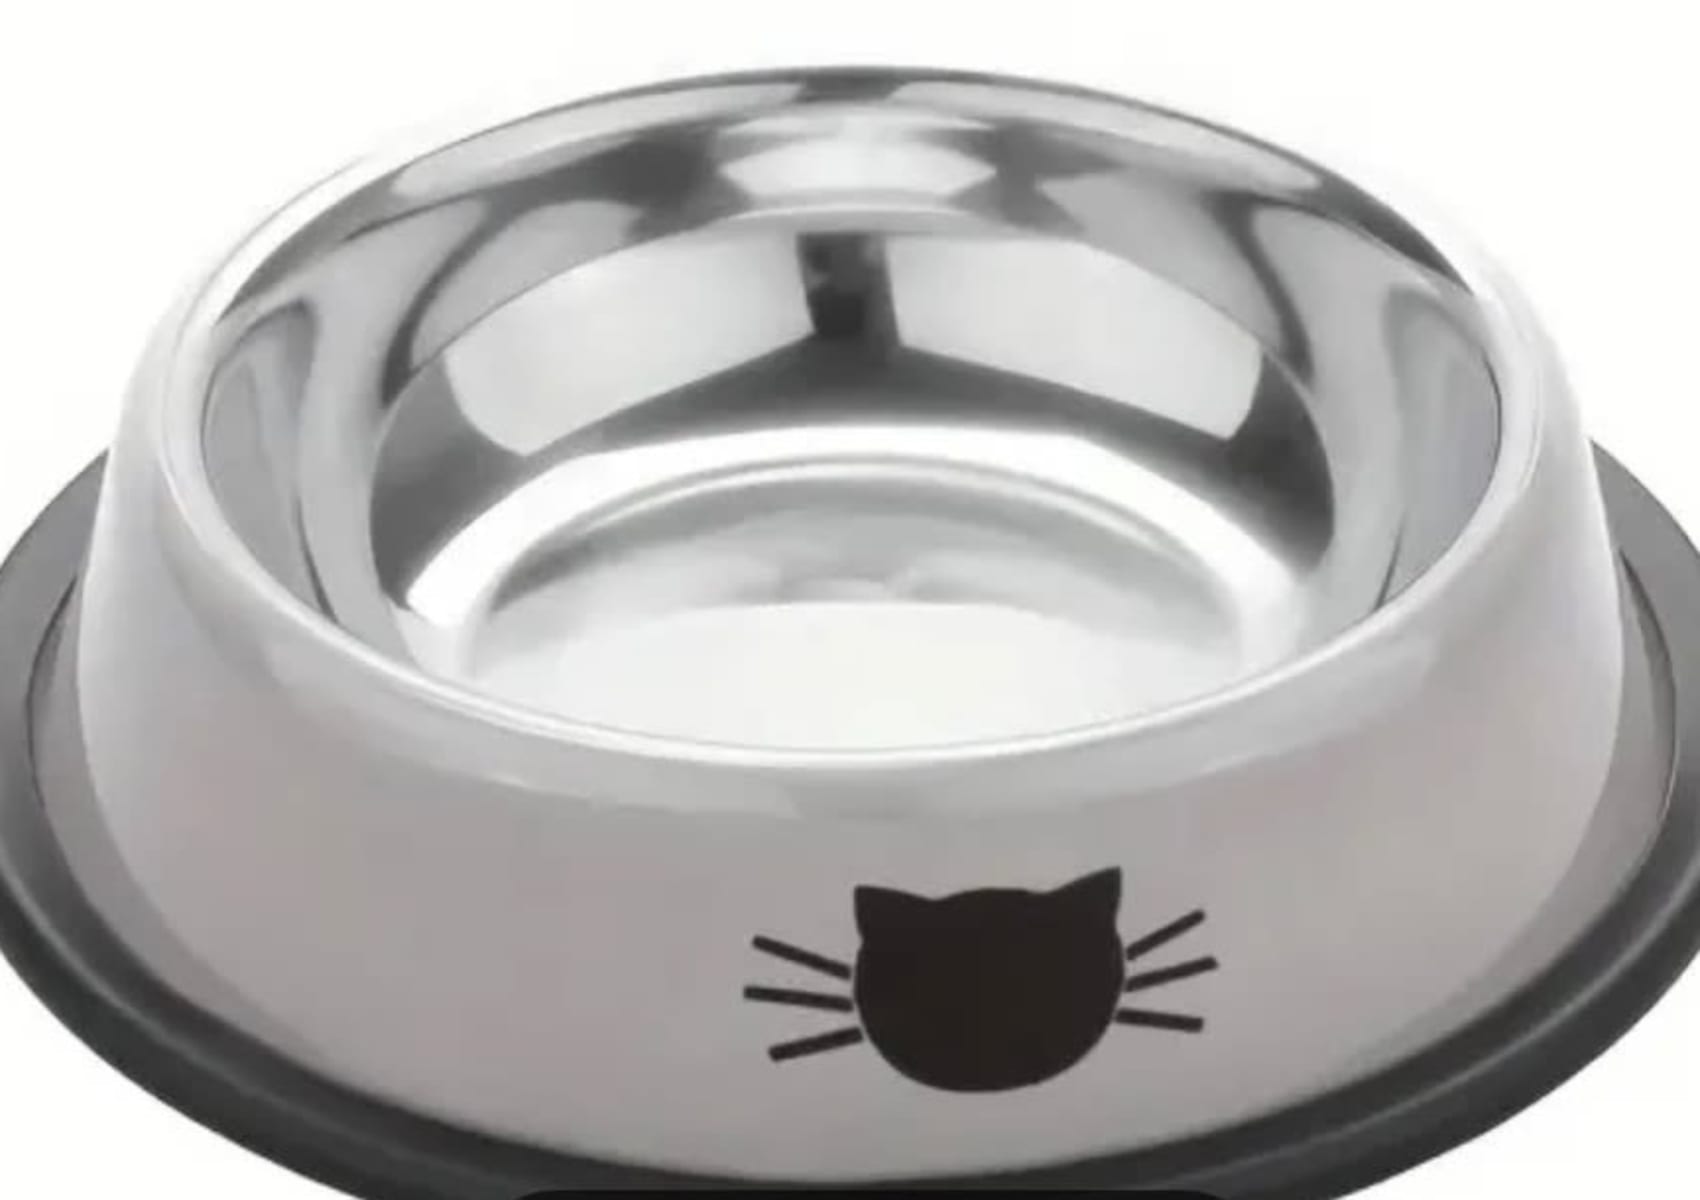 Silver metal cat food bowl on sale at Yorkshire Cat Rescue